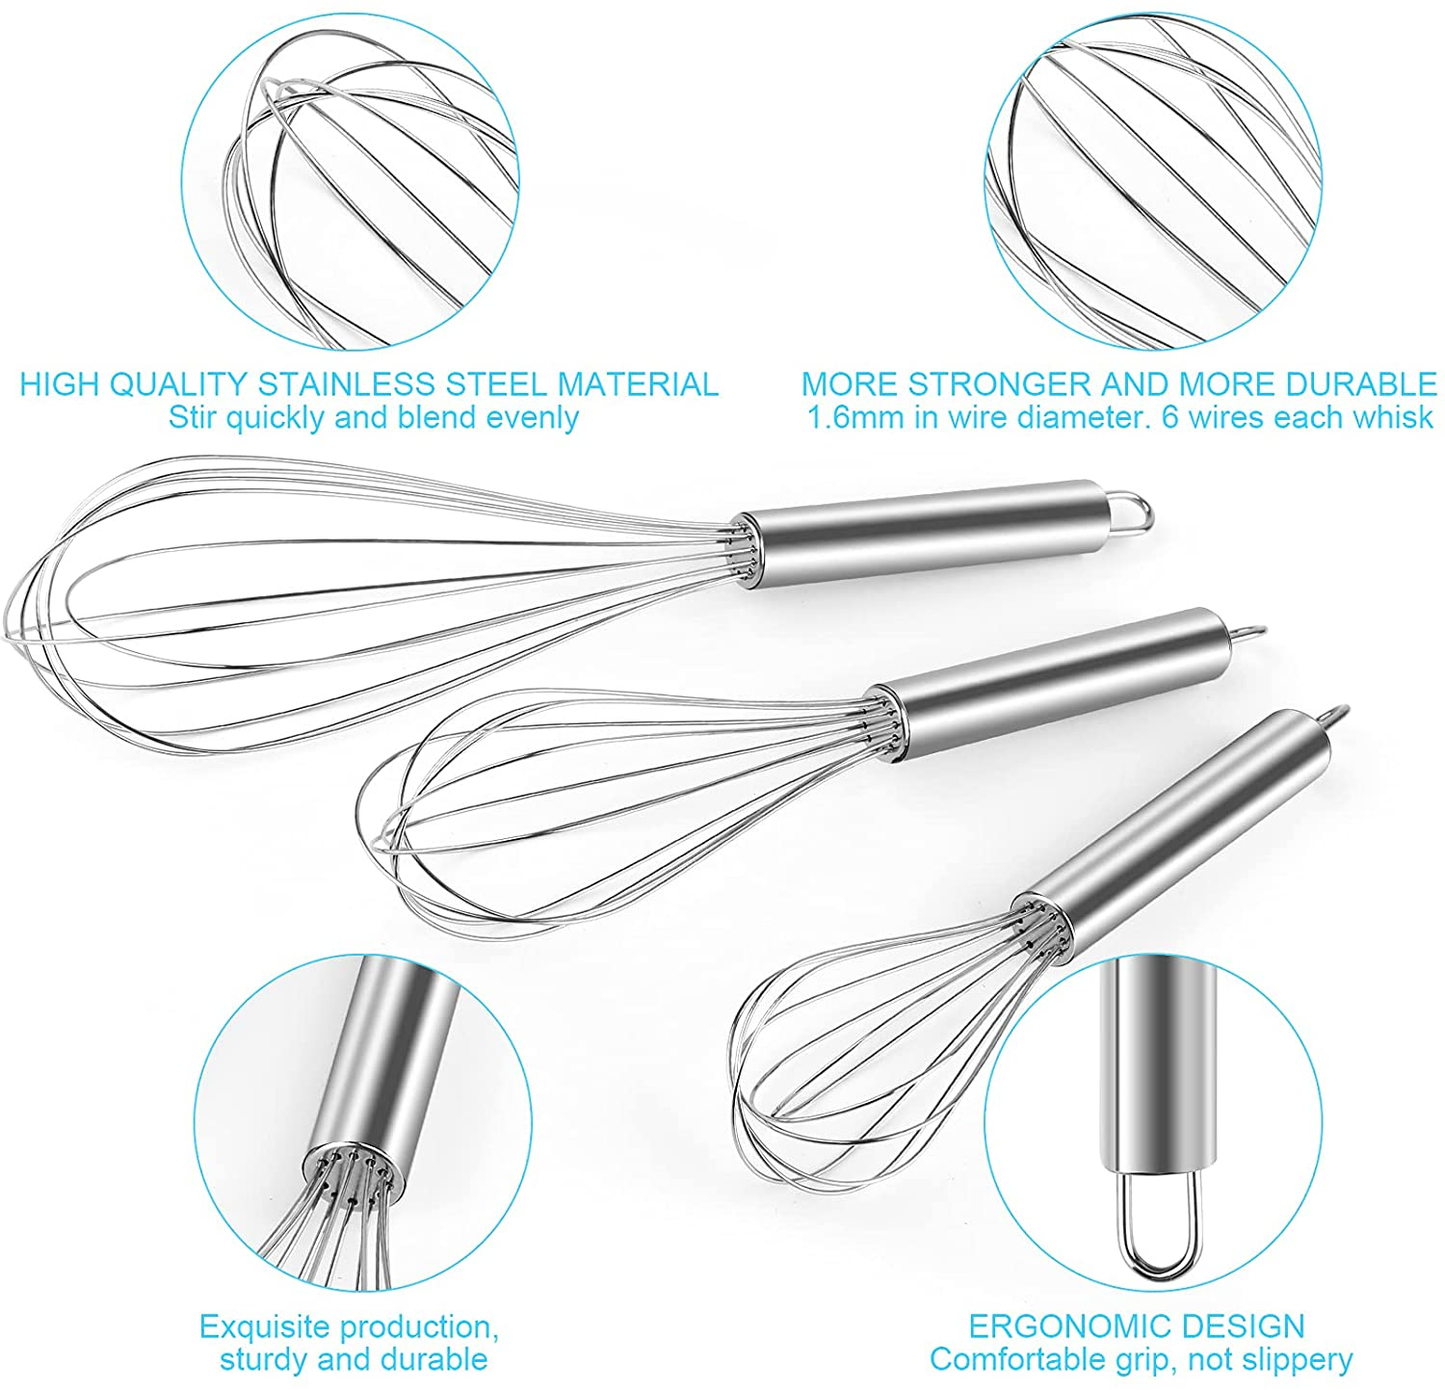 YLYL 3 Pcs Large Small Metal Mini Whisk Sets, Stainless Steel Egg Wire Tiny Whisks for Cooking Baking, Professional Whisking Wisk Kitchen Tool Utensil, Beater Balloon Whisker/Wisks/Wisker for Stirring